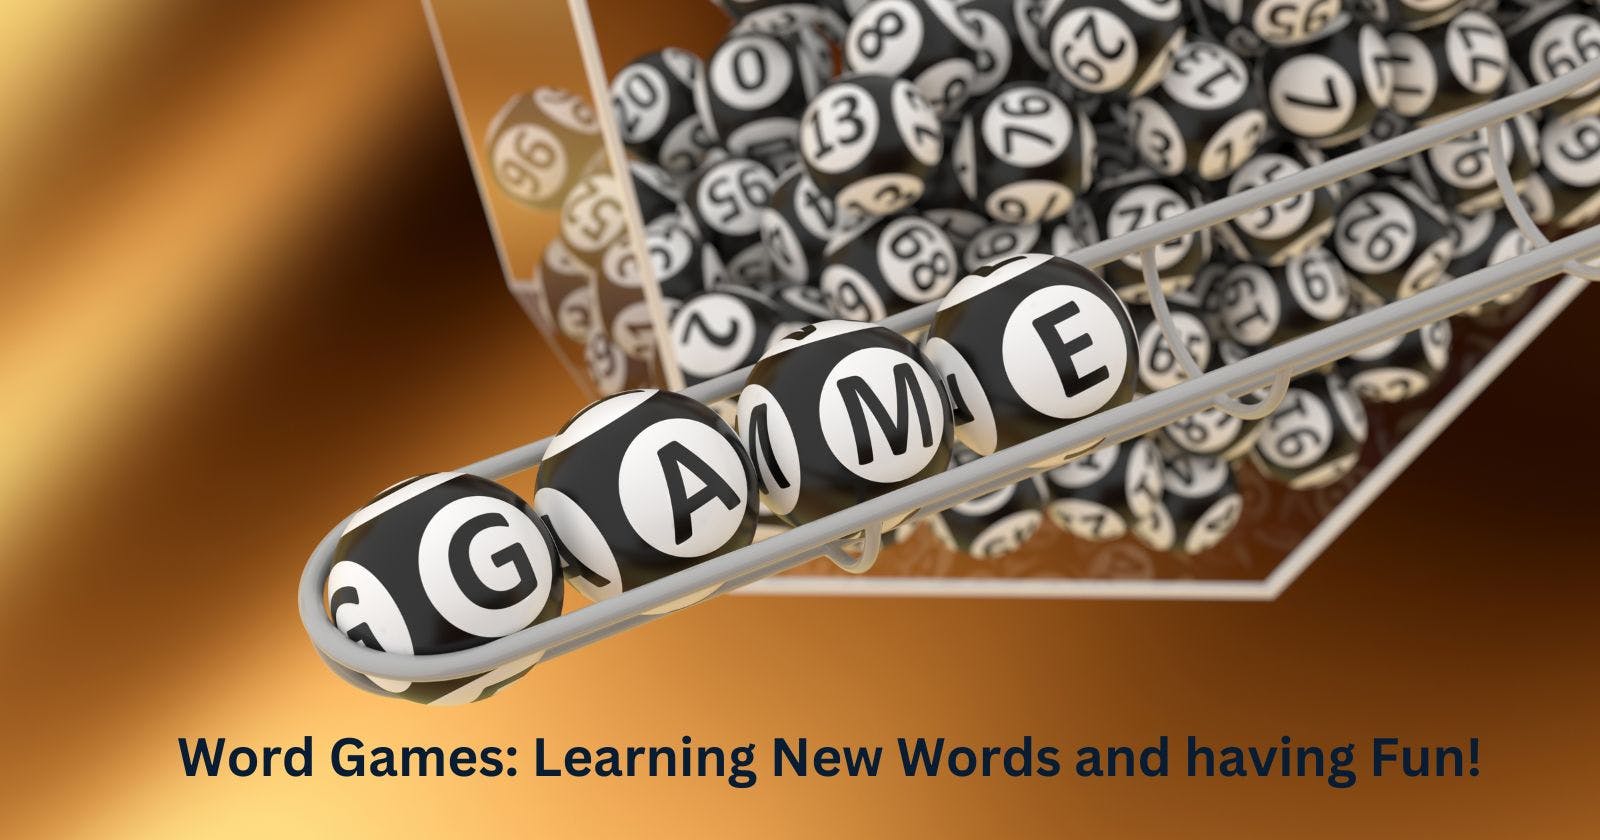 Word Games: Learning New Words and having Fun!